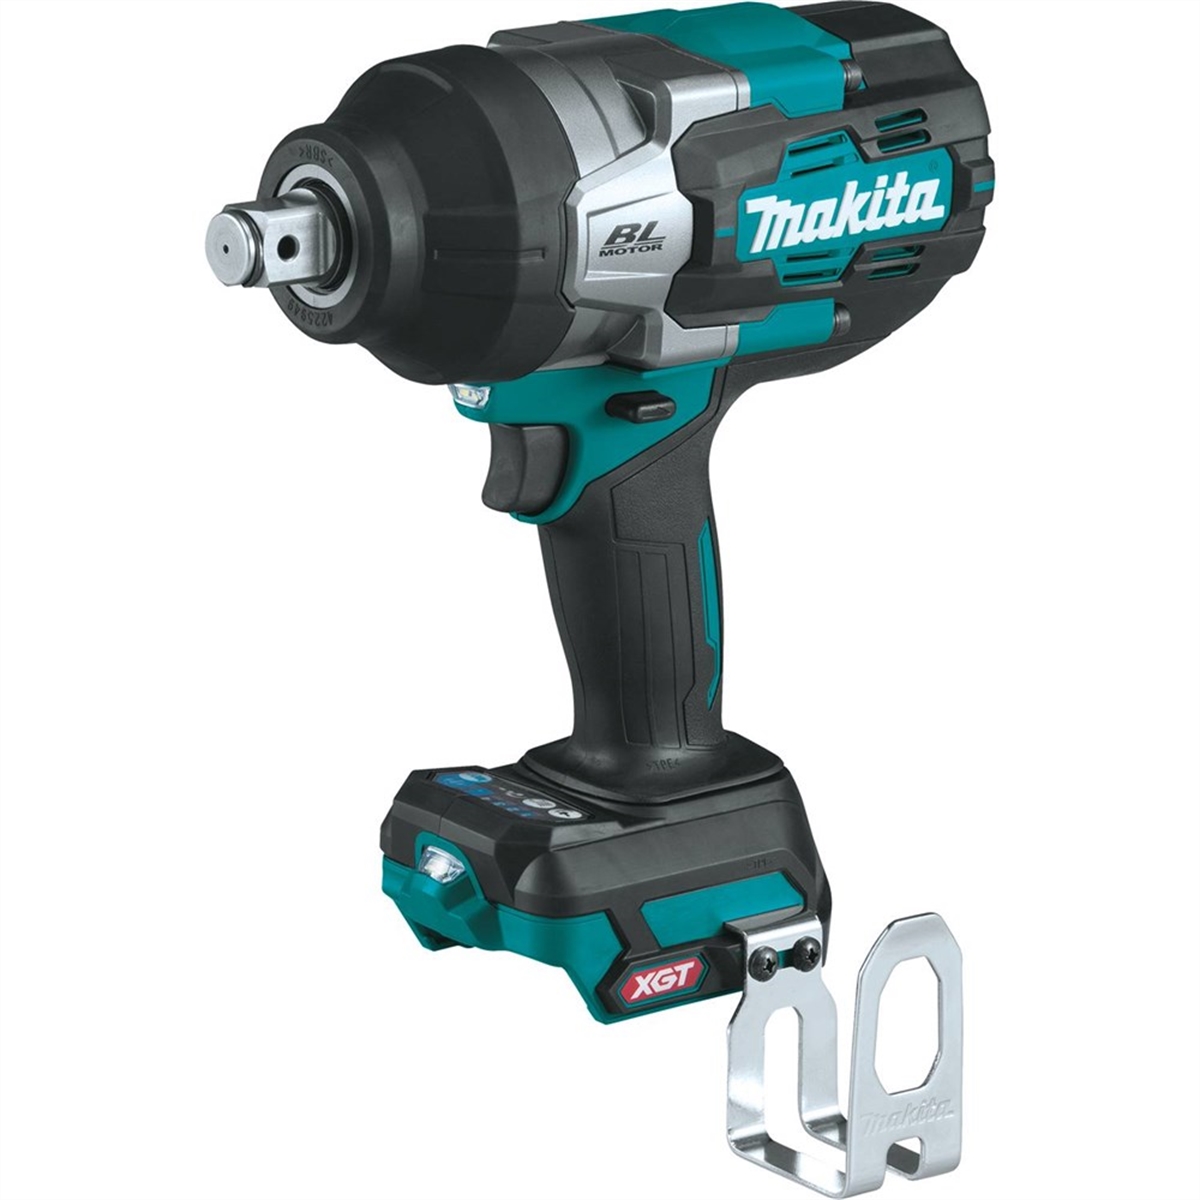 4-Speed High-Torque 3/4" Sq. Drive Impact Wrench w